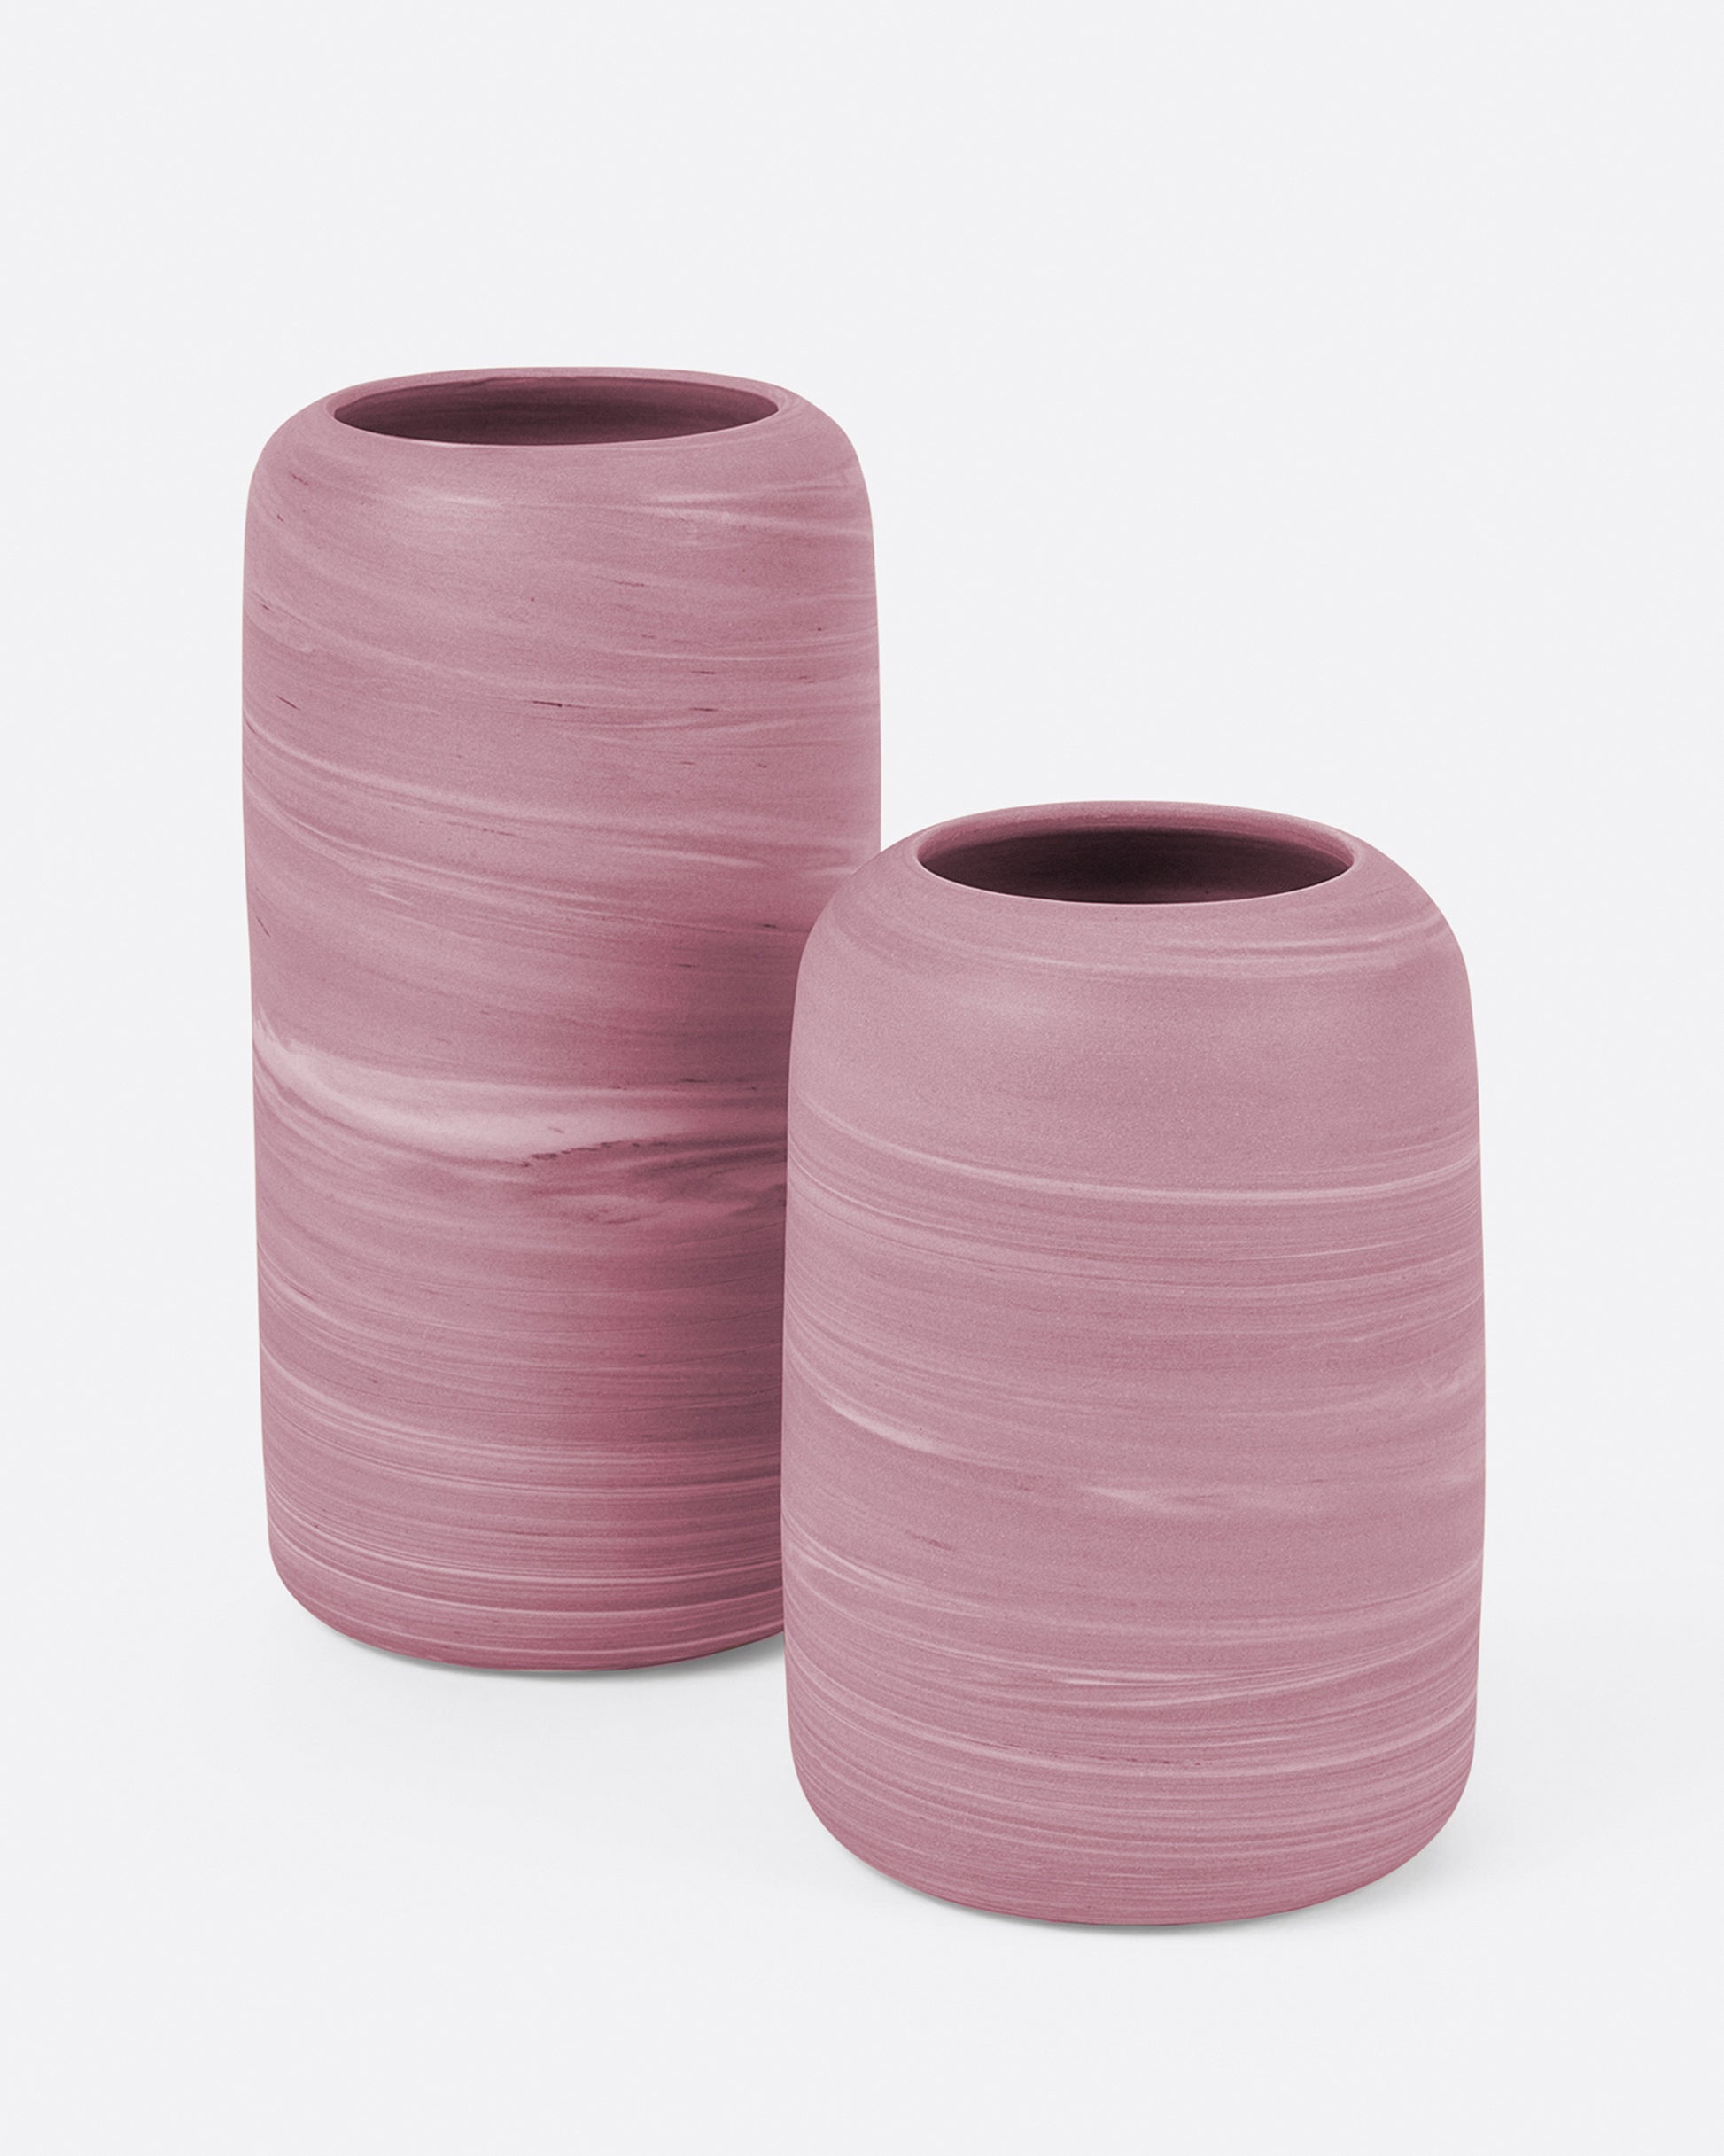 Two marbled purple and white porcelain vases, one small and one large.